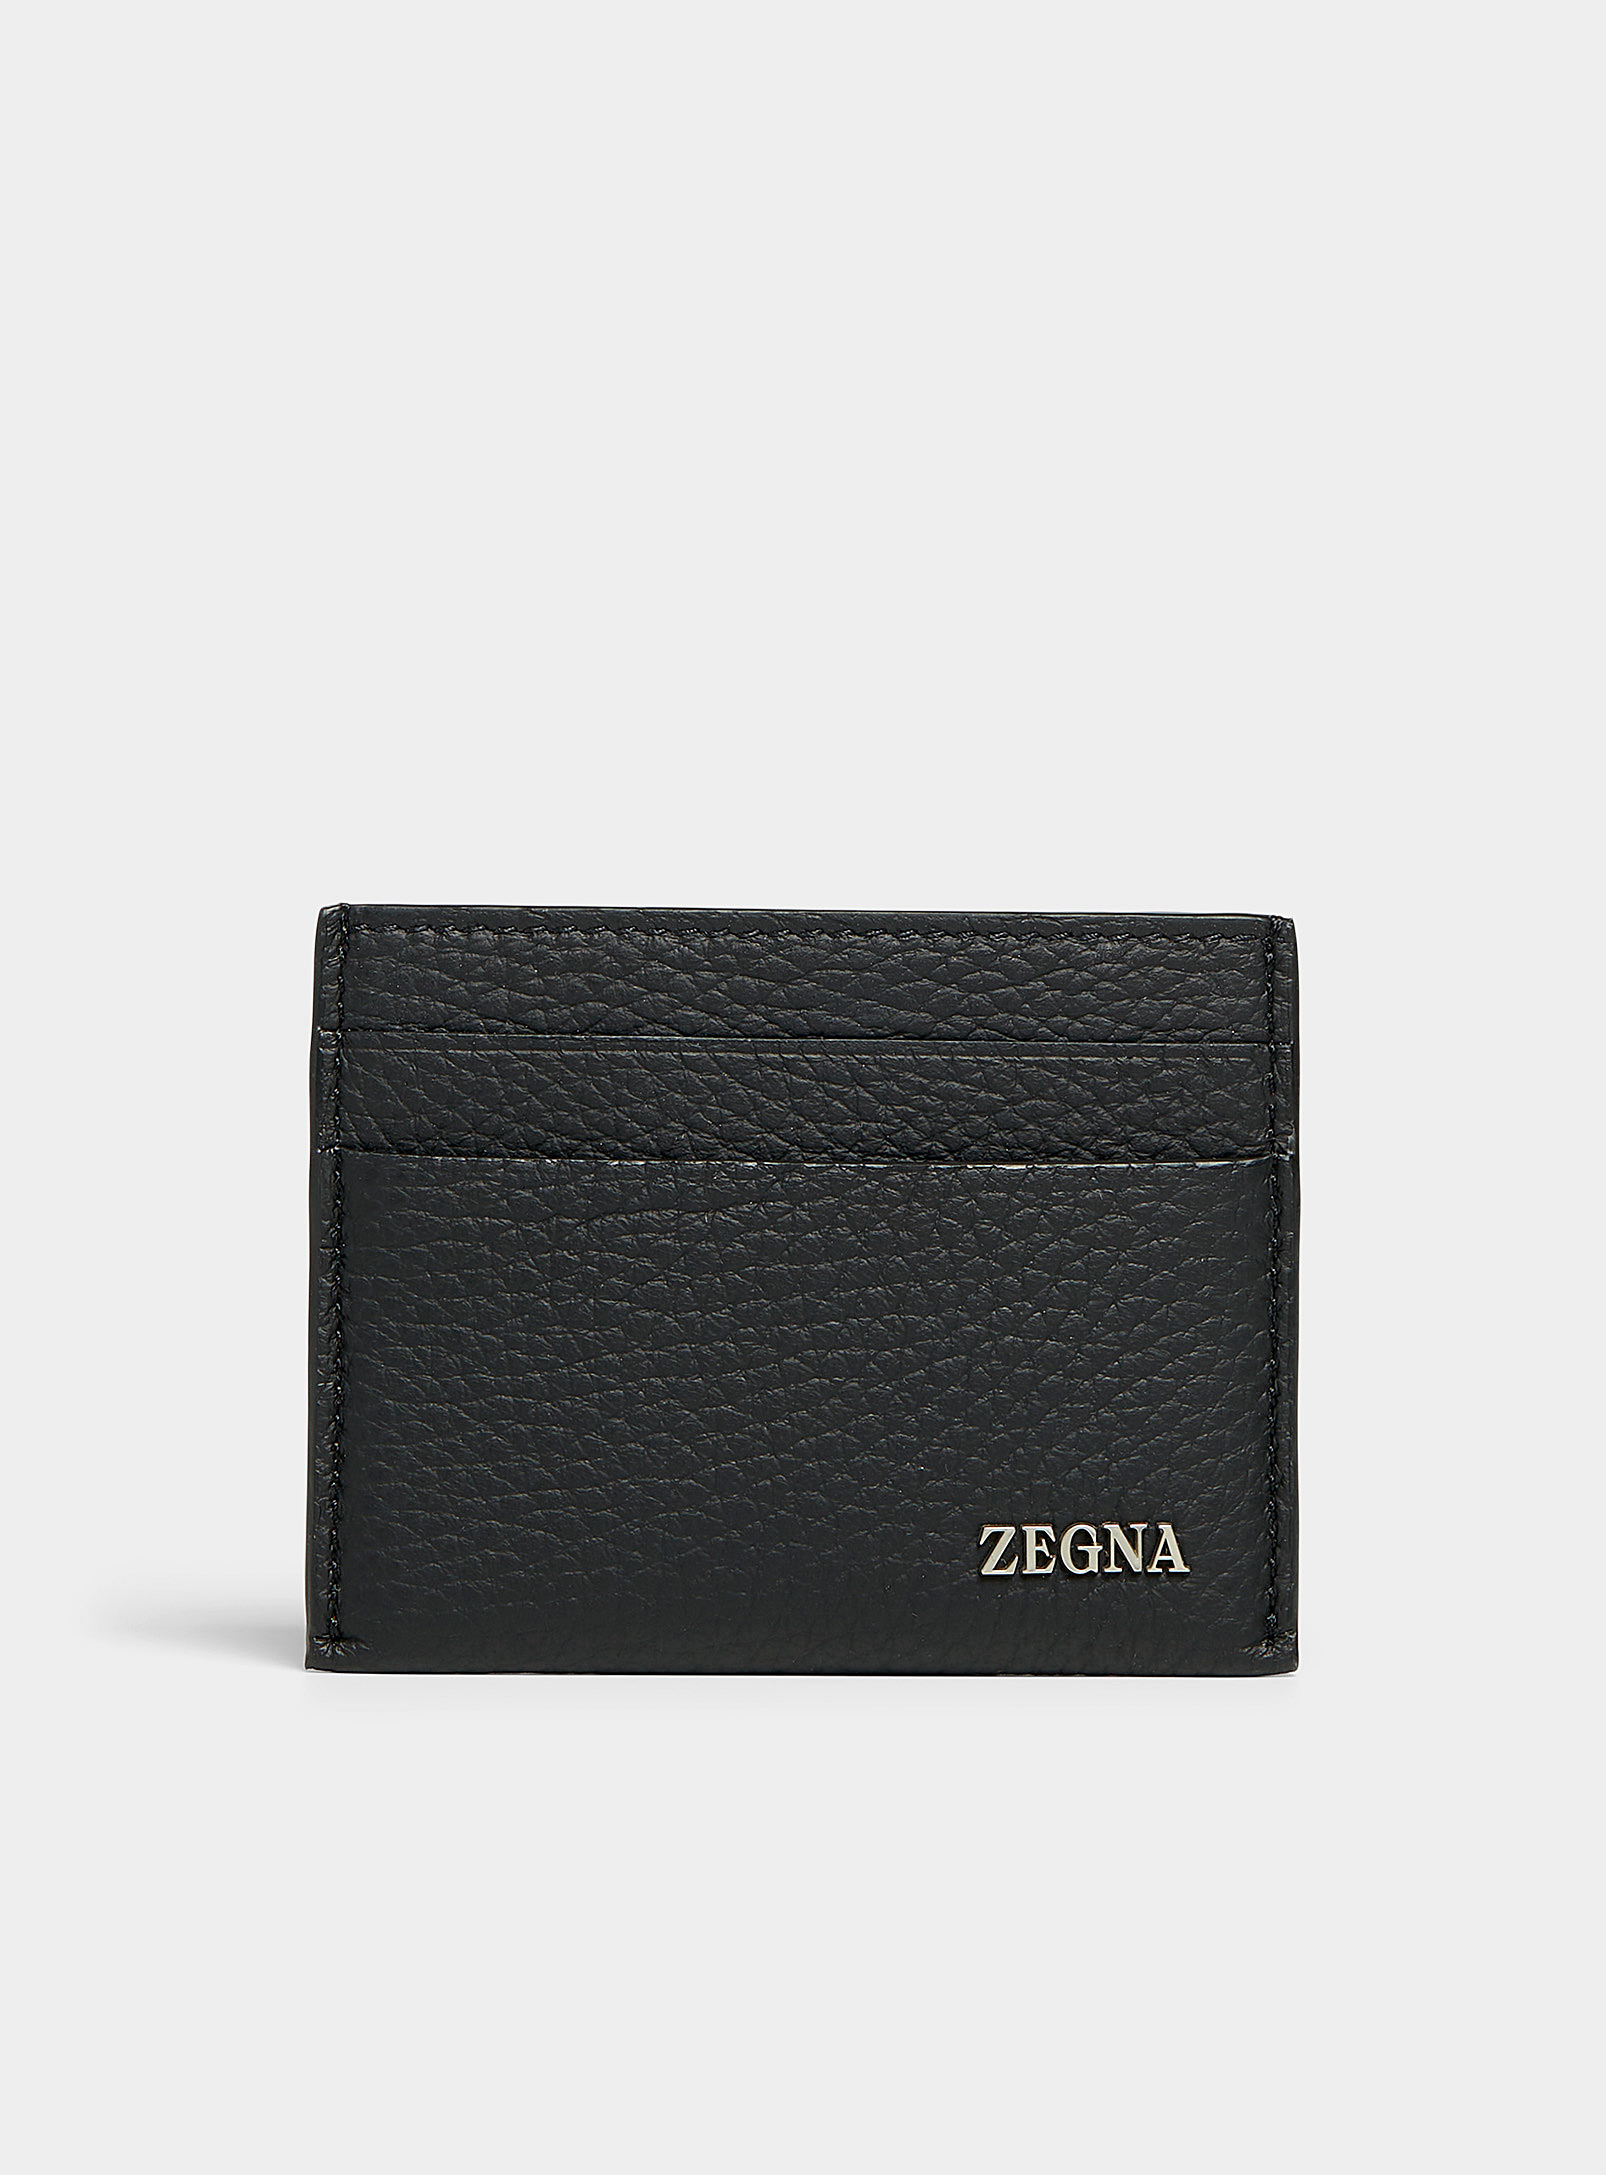 Zegna Grained Leather Card Case In Black